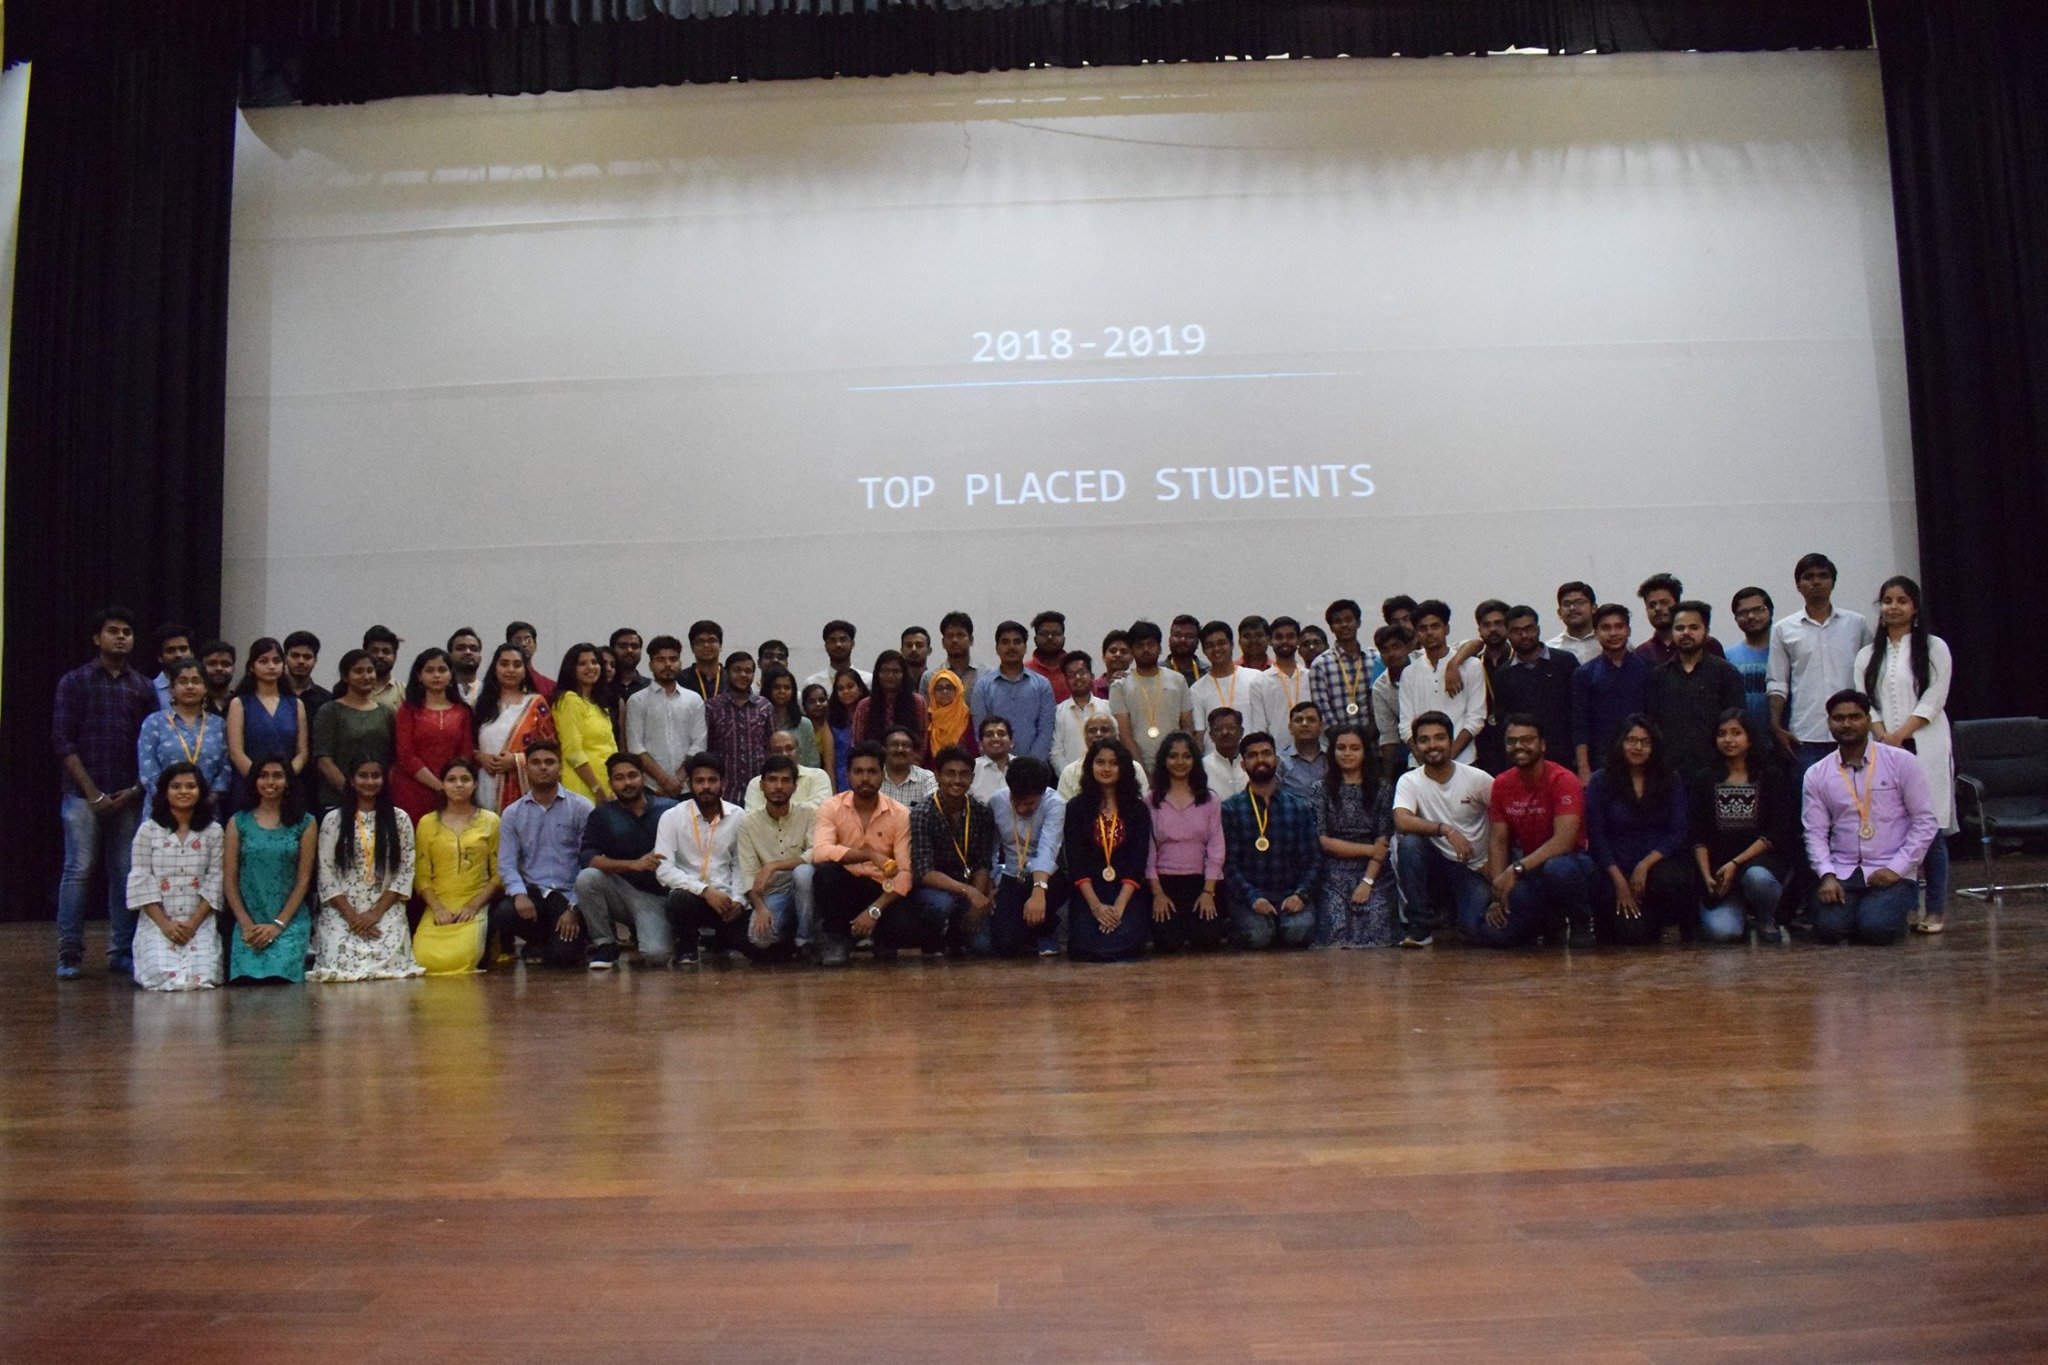 Top placed students of 2018-19 Batch being felicitated by the Director